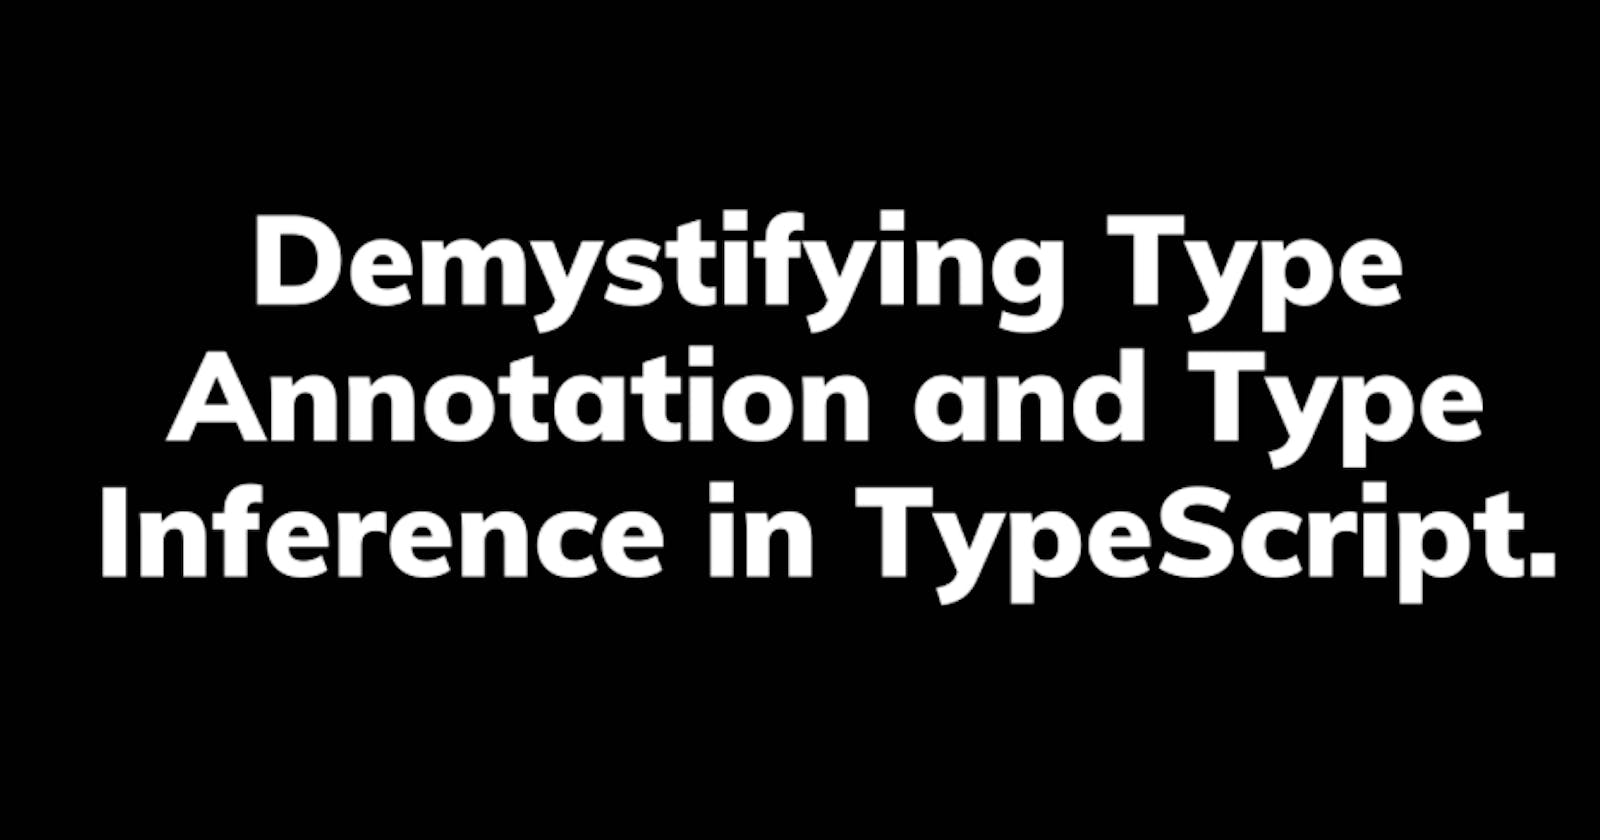 Harnessing the power of TypeScript Type Annotation and inference in our program.